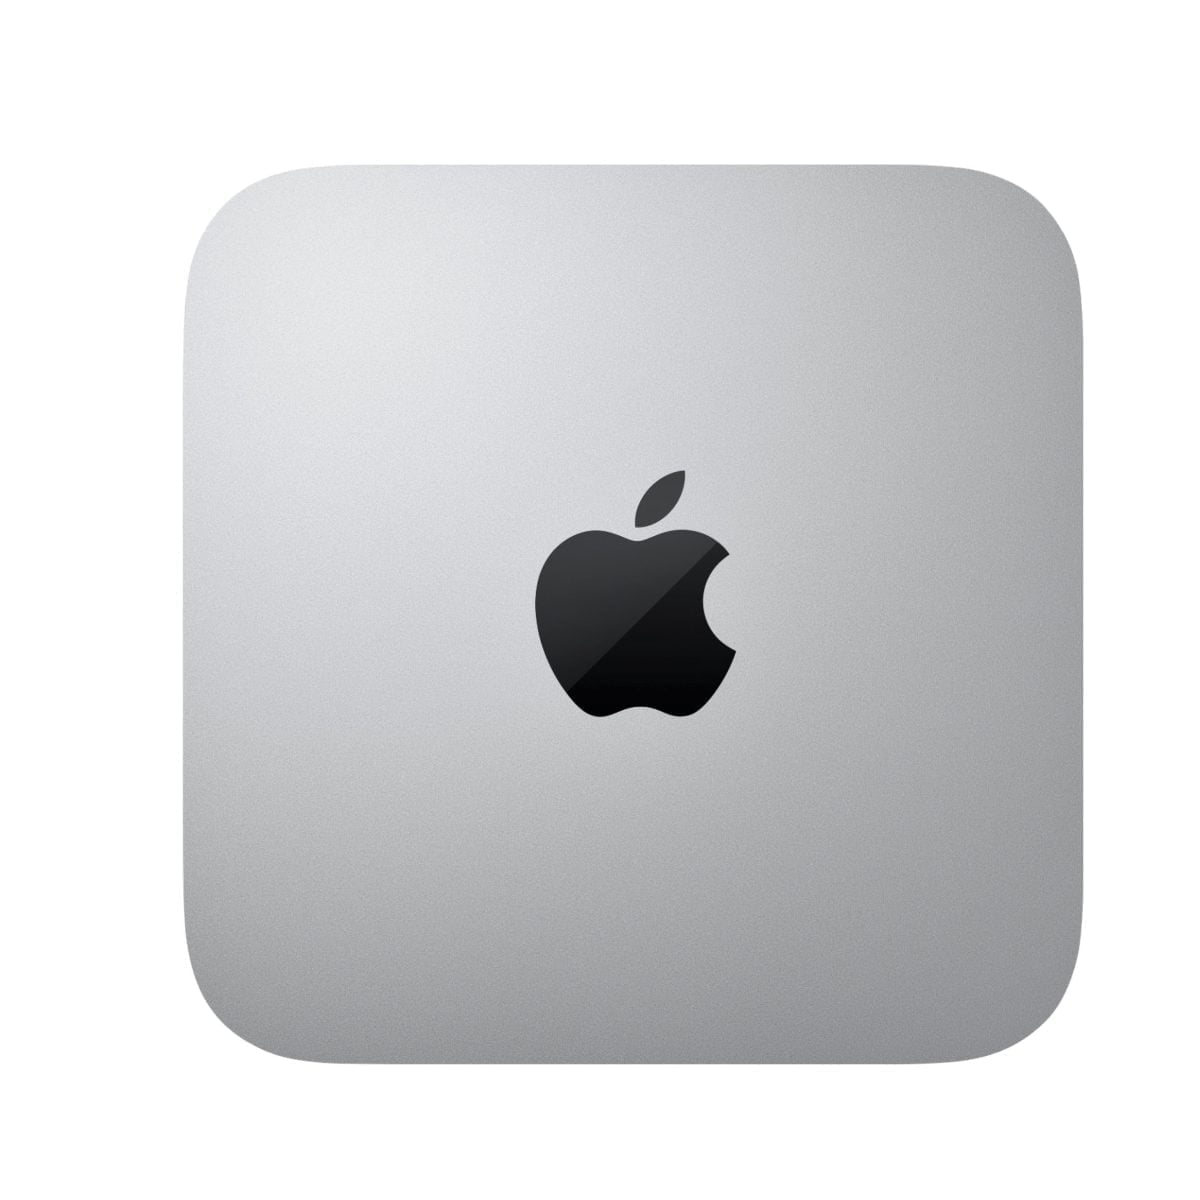 6427497Cv11D Scaled Apple &Lt;H1 Class=&Quot;Heading-5 V-Fw-Regular&Quot;&Gt;Mac Mini Desktop - Apple M1 Chip - 8Gb Memory - 256Gb Ssd (Latest Model) - Silver&Lt;/H1&Gt; Https://Www.youtube.com/Watch?V=3Oq__Scnyna Mac Mini, The Most Versatile, Do-It-All Mac Desktop, To A Whole New Level Of Performance. With Up To 3X Faster Cpu Performance, Up To 6X Faster Graphics, A Powerful Neural Engine With Up To 15X Faster Machine Learning, And Superfast Unified Memory — All In An Ultracompact Design.so You Can Create, Work, And Play On Mac Mini With Speed And Power Beyond Anything You Ever Imagined. Mac Mini Mac Mini Desktop - Apple M1 Chip - 8Gb Memory - 256Gb Ssd (Latest Model) - Silver